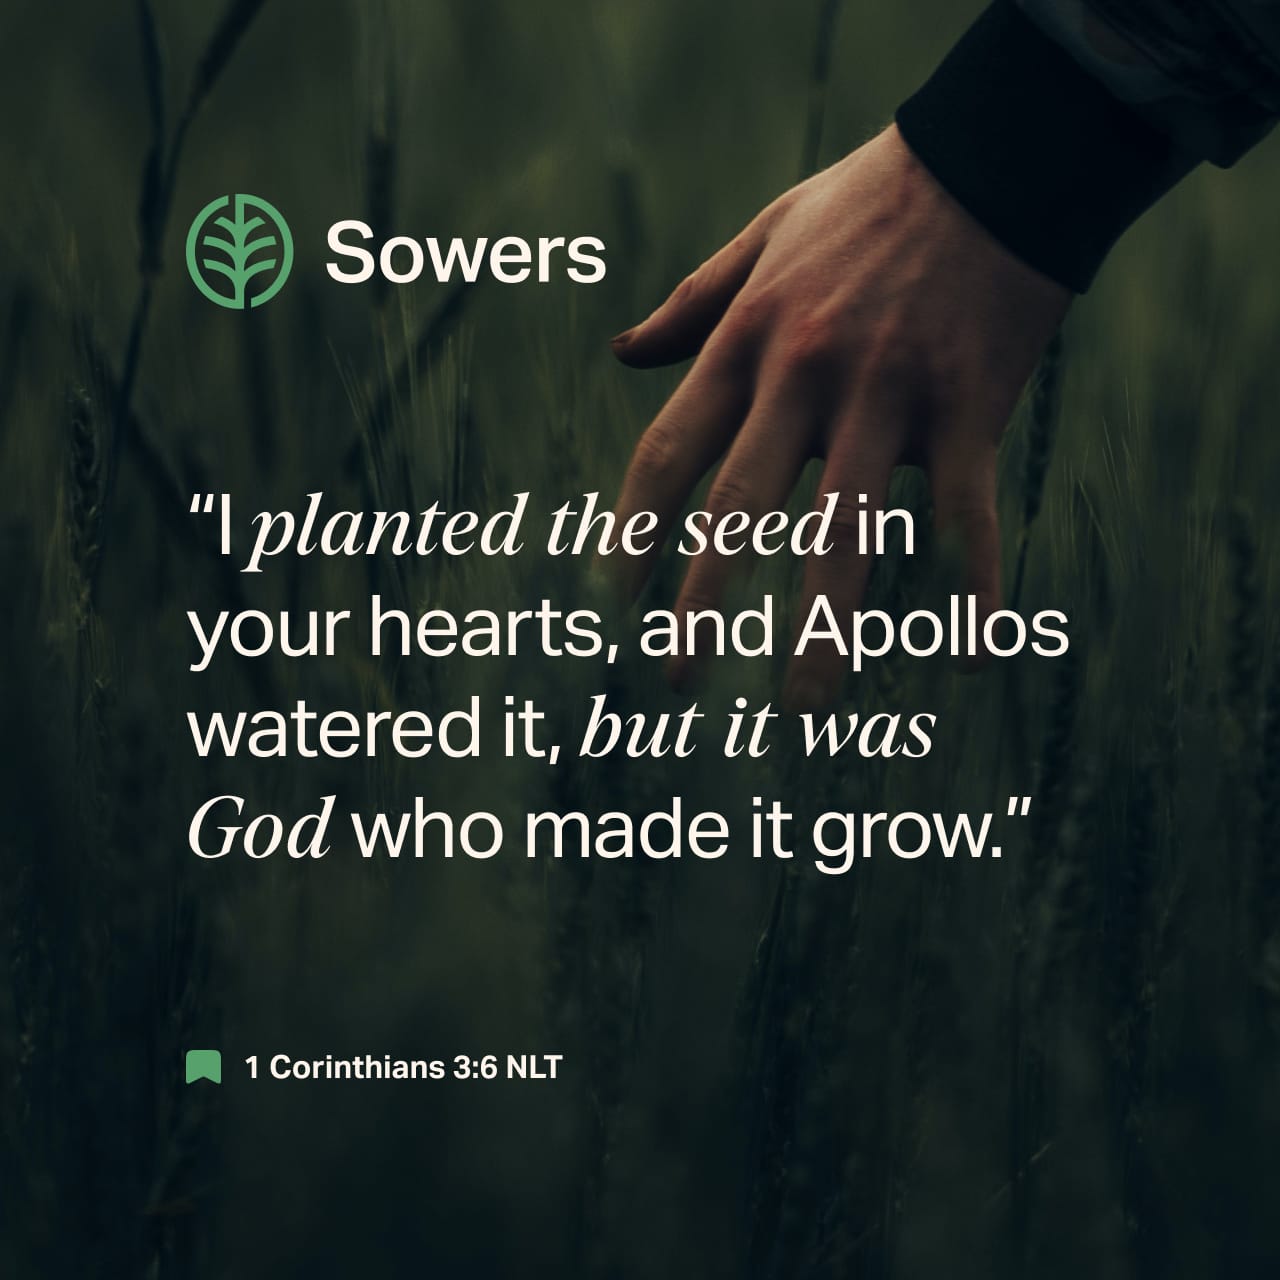 “I planted the seed in your hearts, and Apollos watered it, but it was God who made it grow.” - 1 Corinthians 3:6 - Verse Image